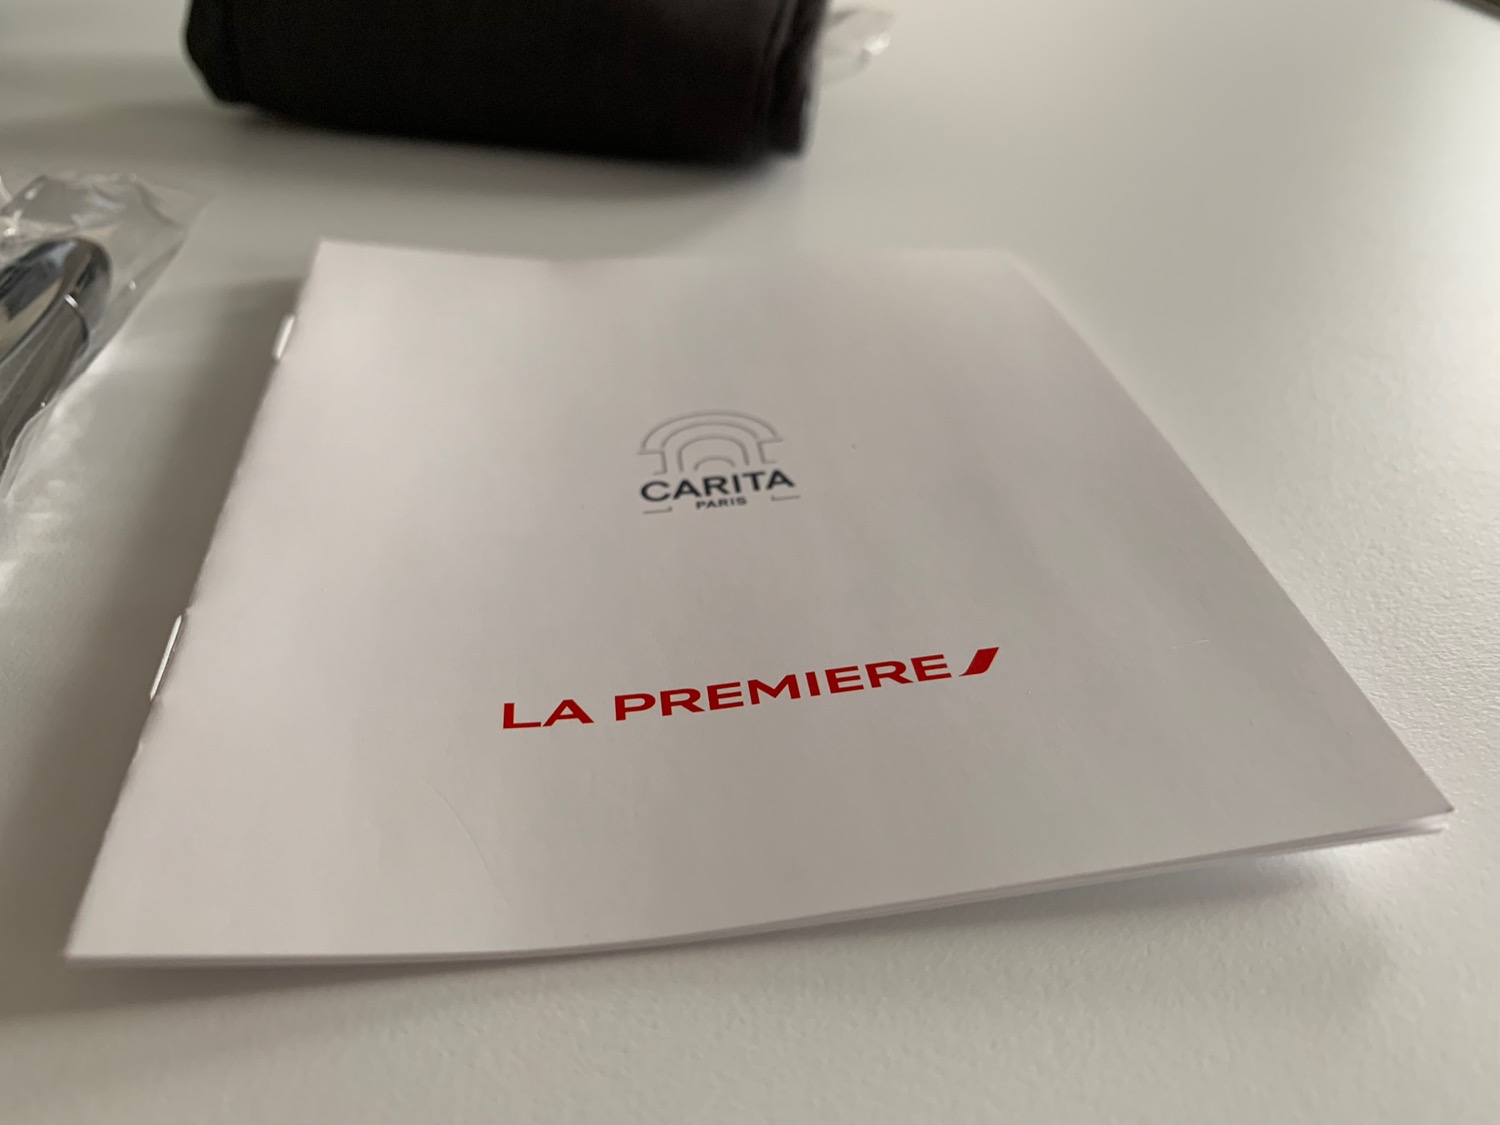 a white paper with red text on it